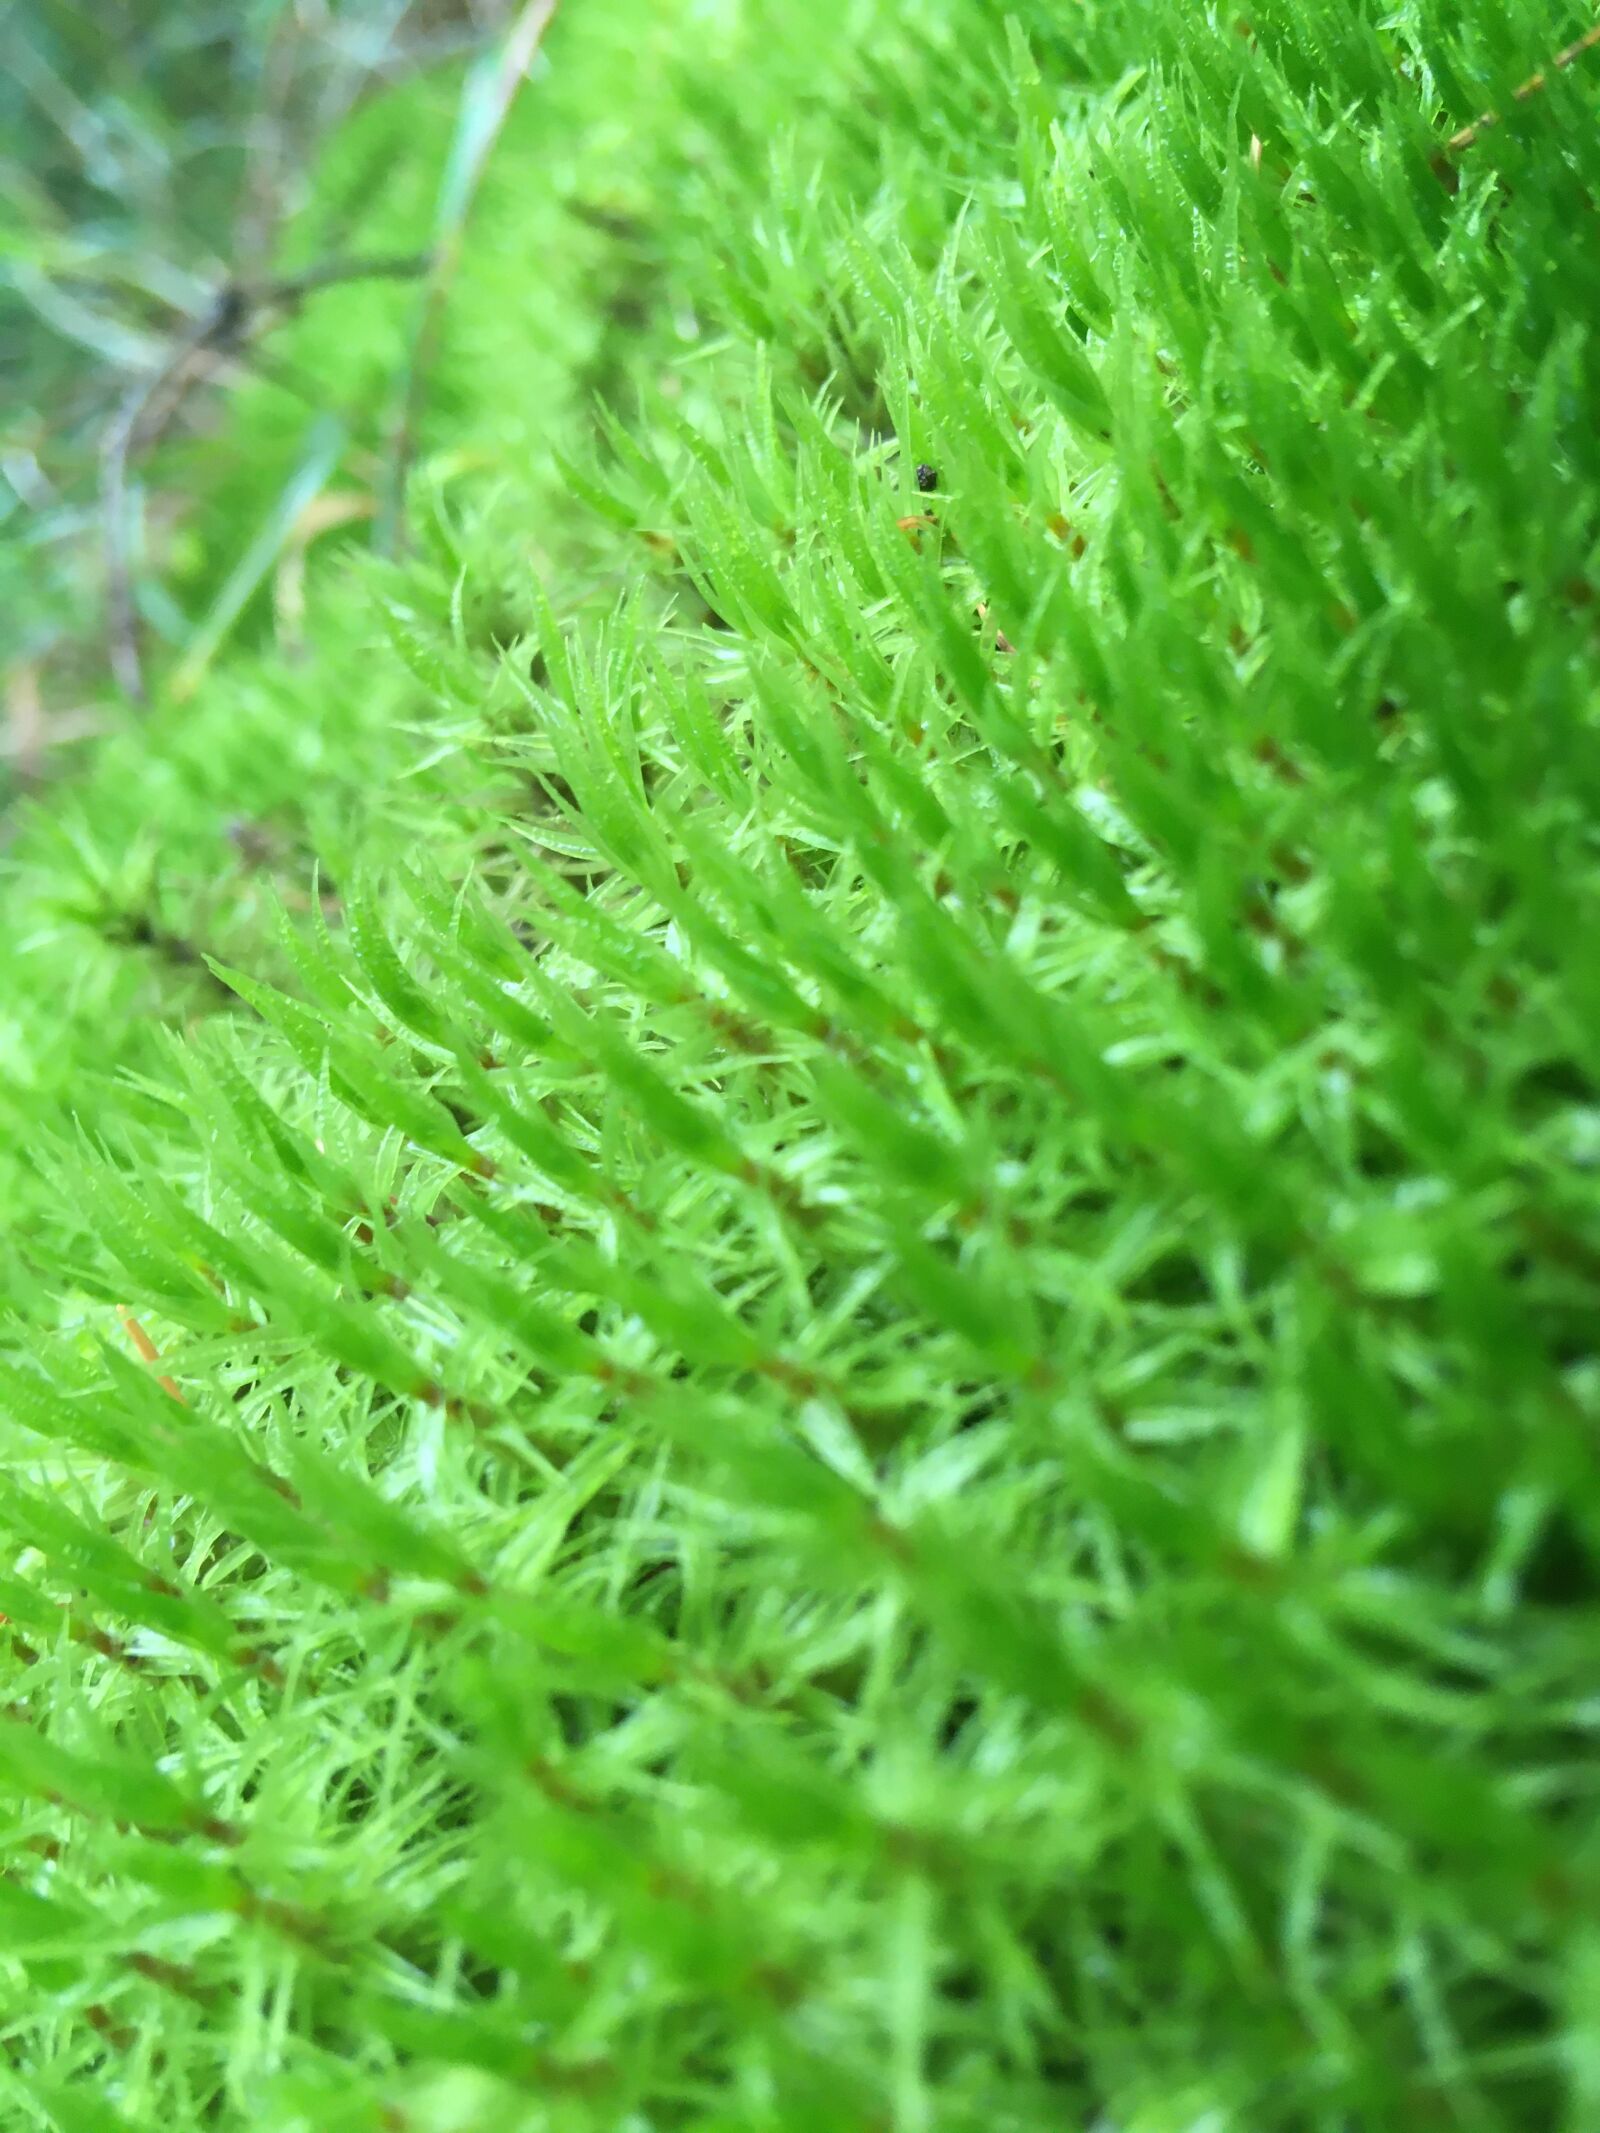 Apple iPhone SE (1st generation) + iPhone SE (1st generation) back camera 4.15mm f/2.2 sample photo. Moss, nature, forest photography